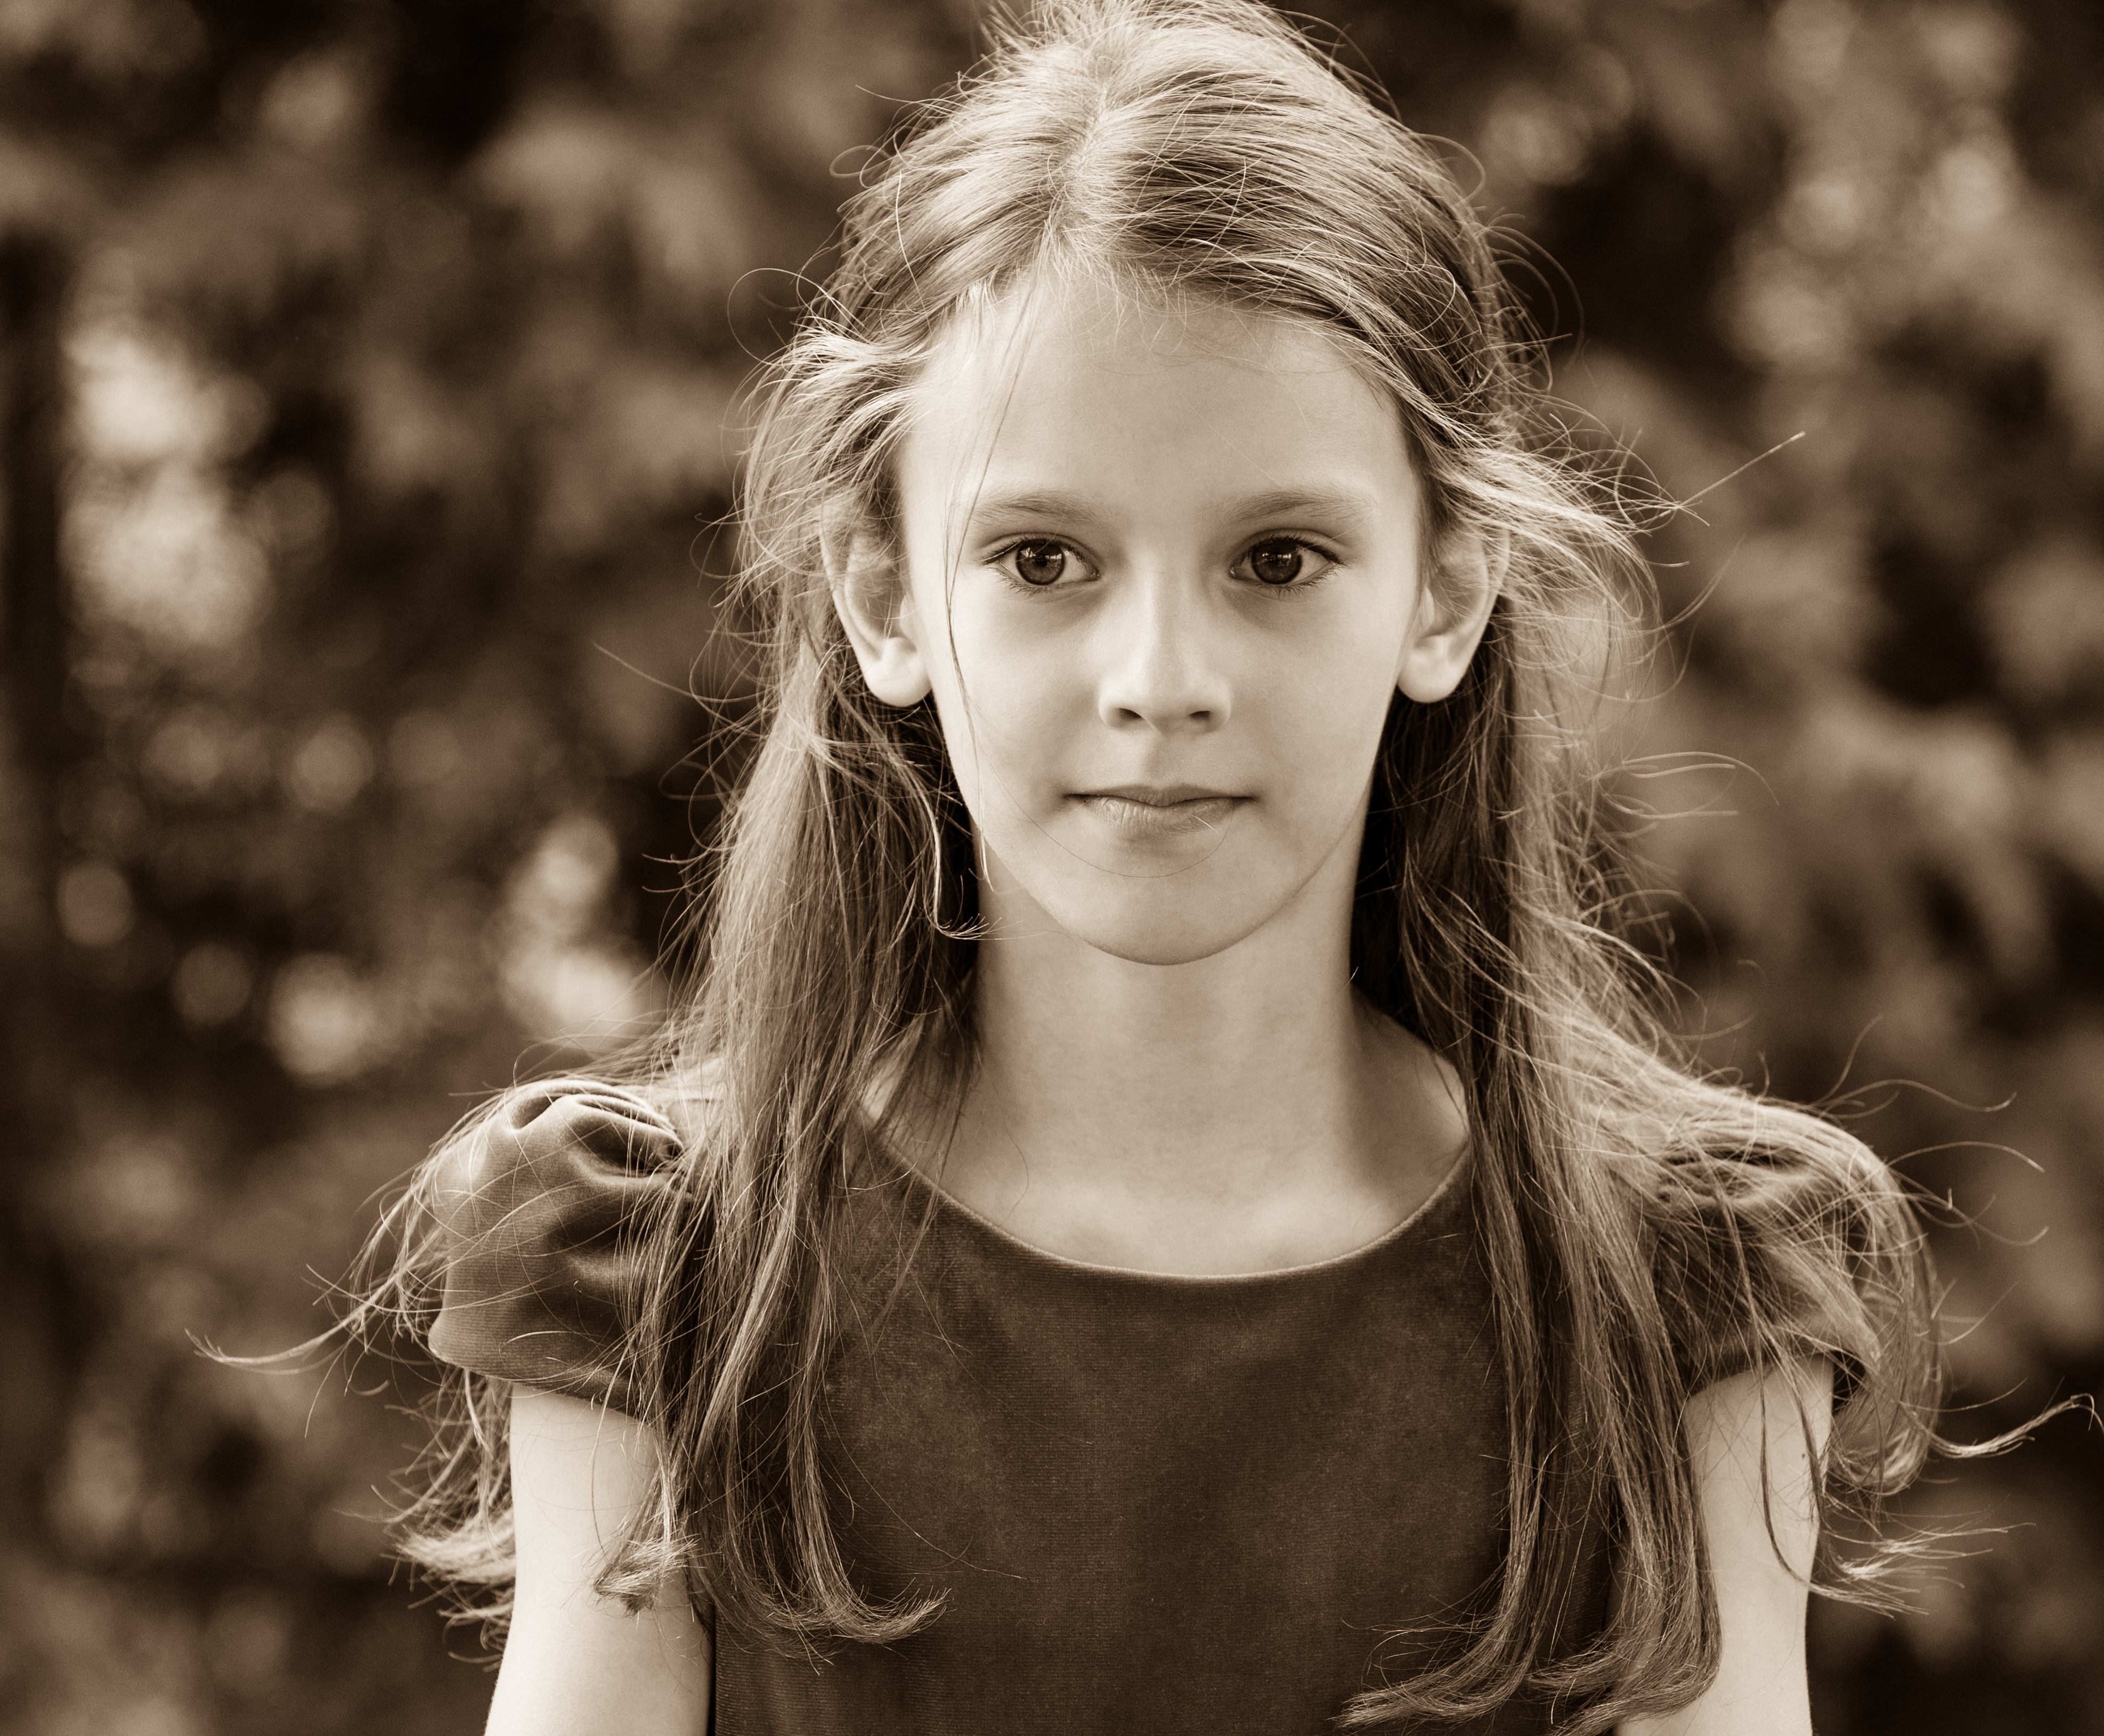 a Christian girl photographed in September 2014, picture 14, black and white